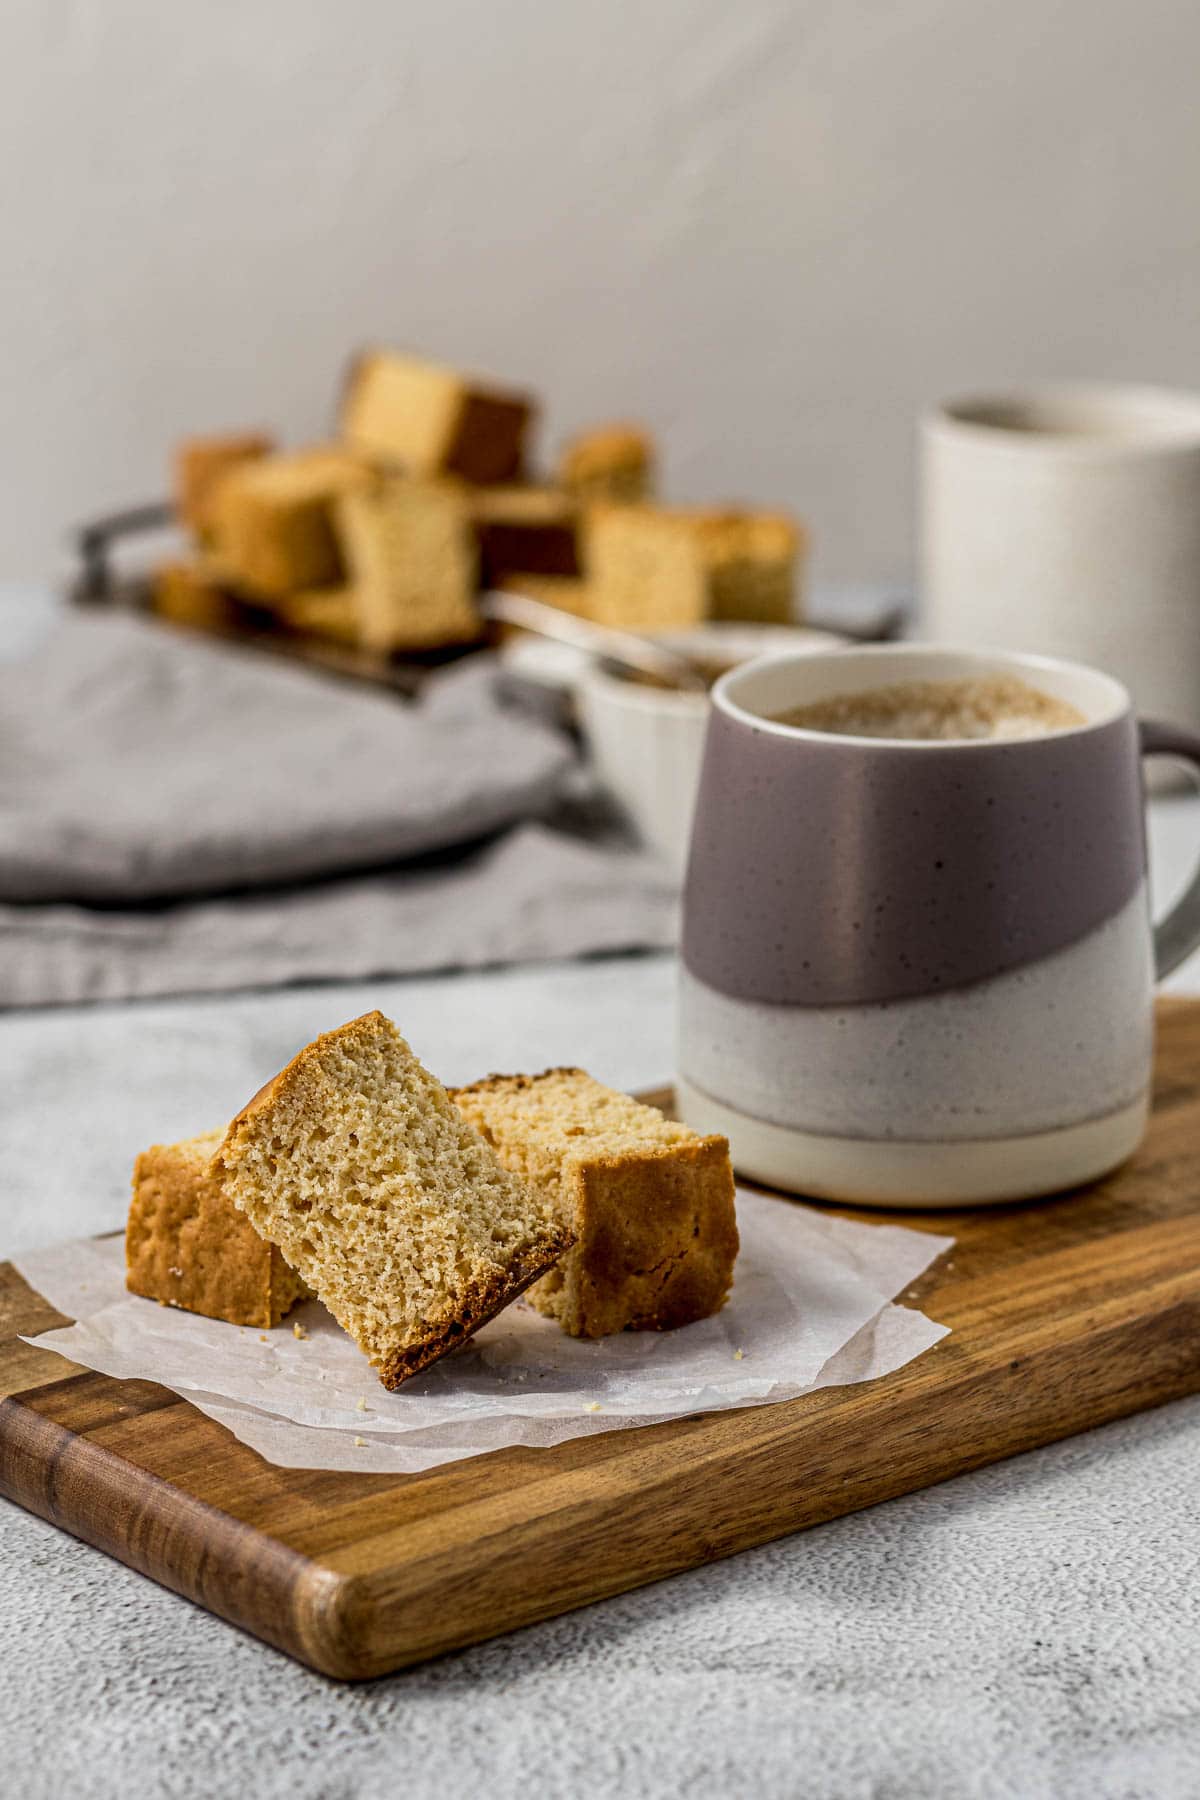 Condensed milk rusks on a plate with a cup of coffee.